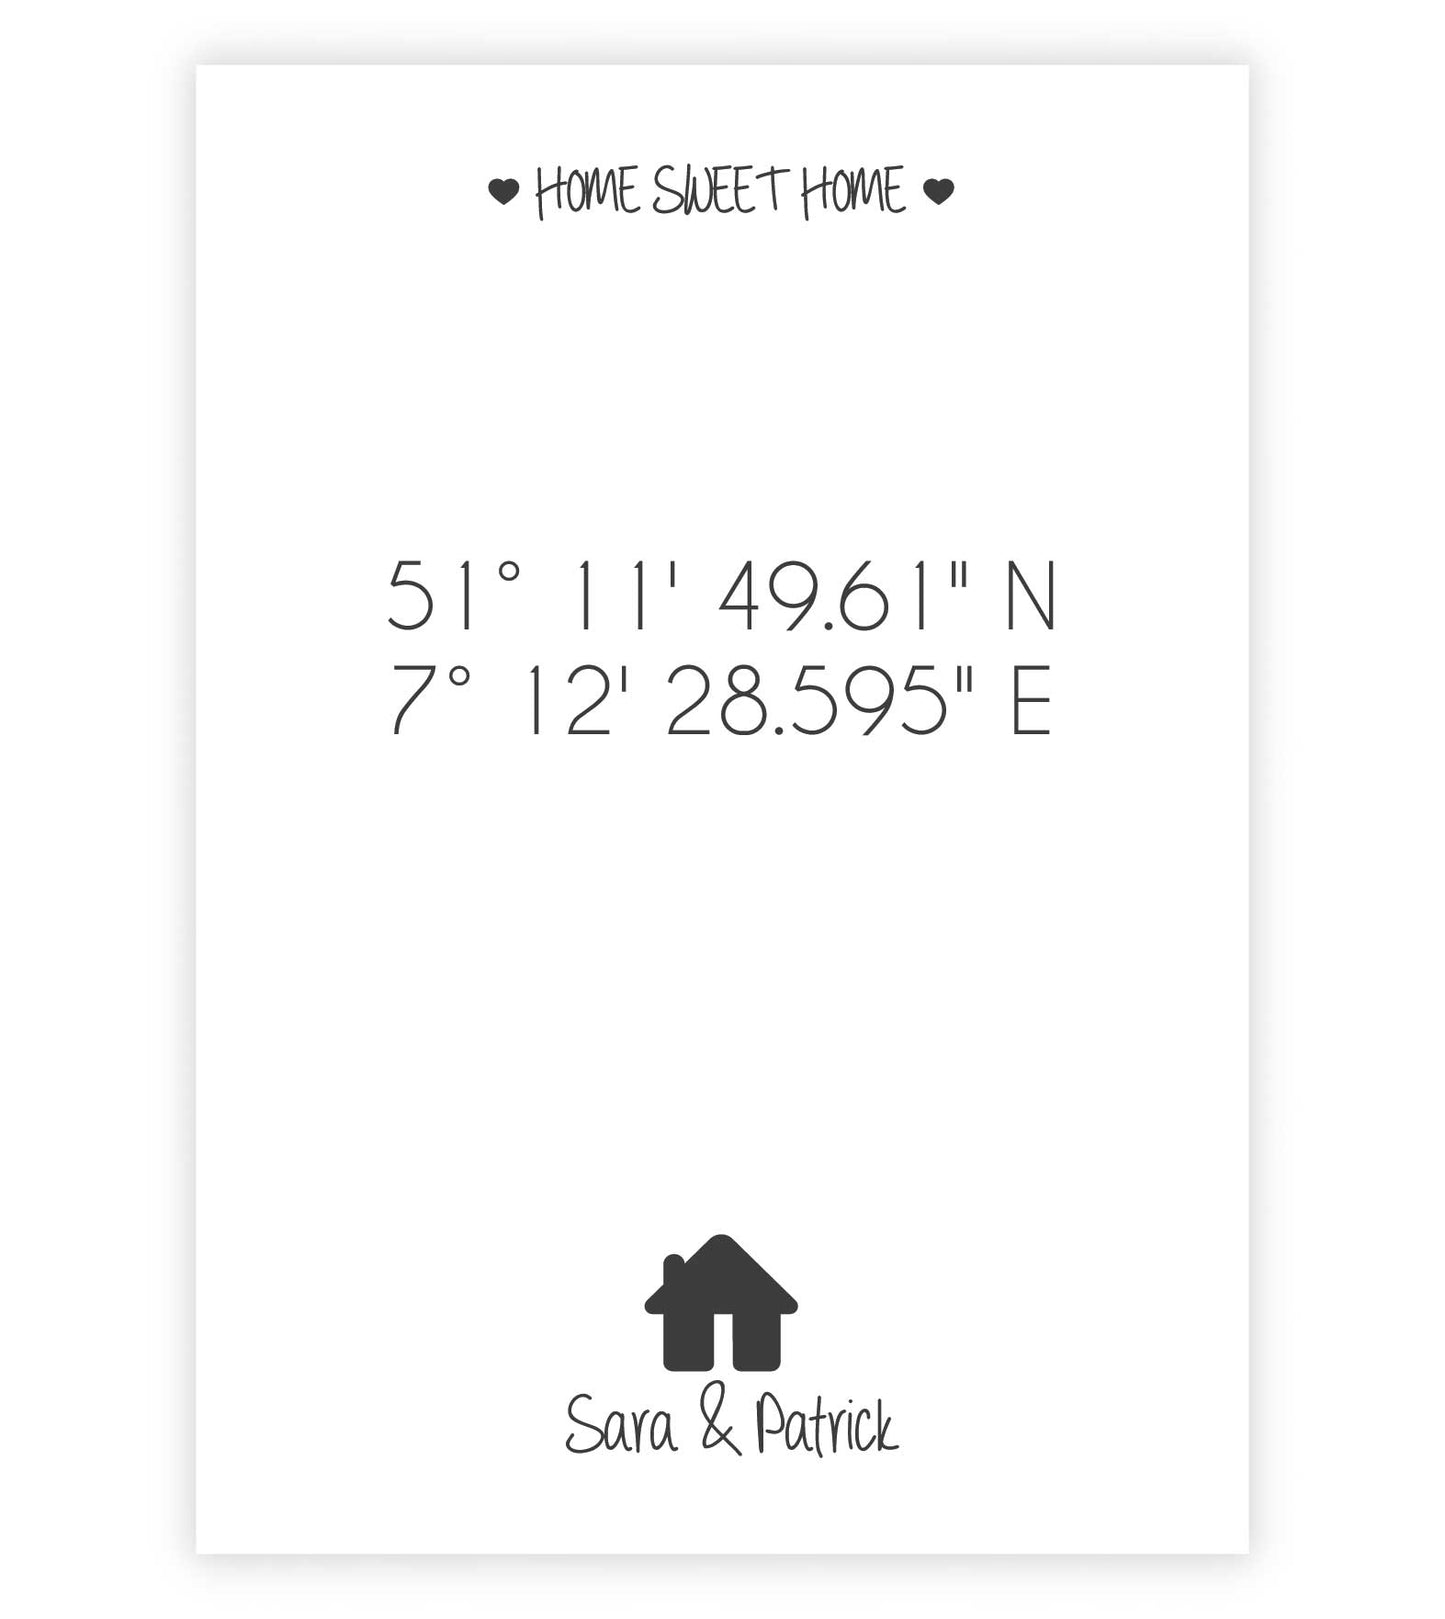 Personalisiertes Poster "HOME SWEET HOME" - Haus